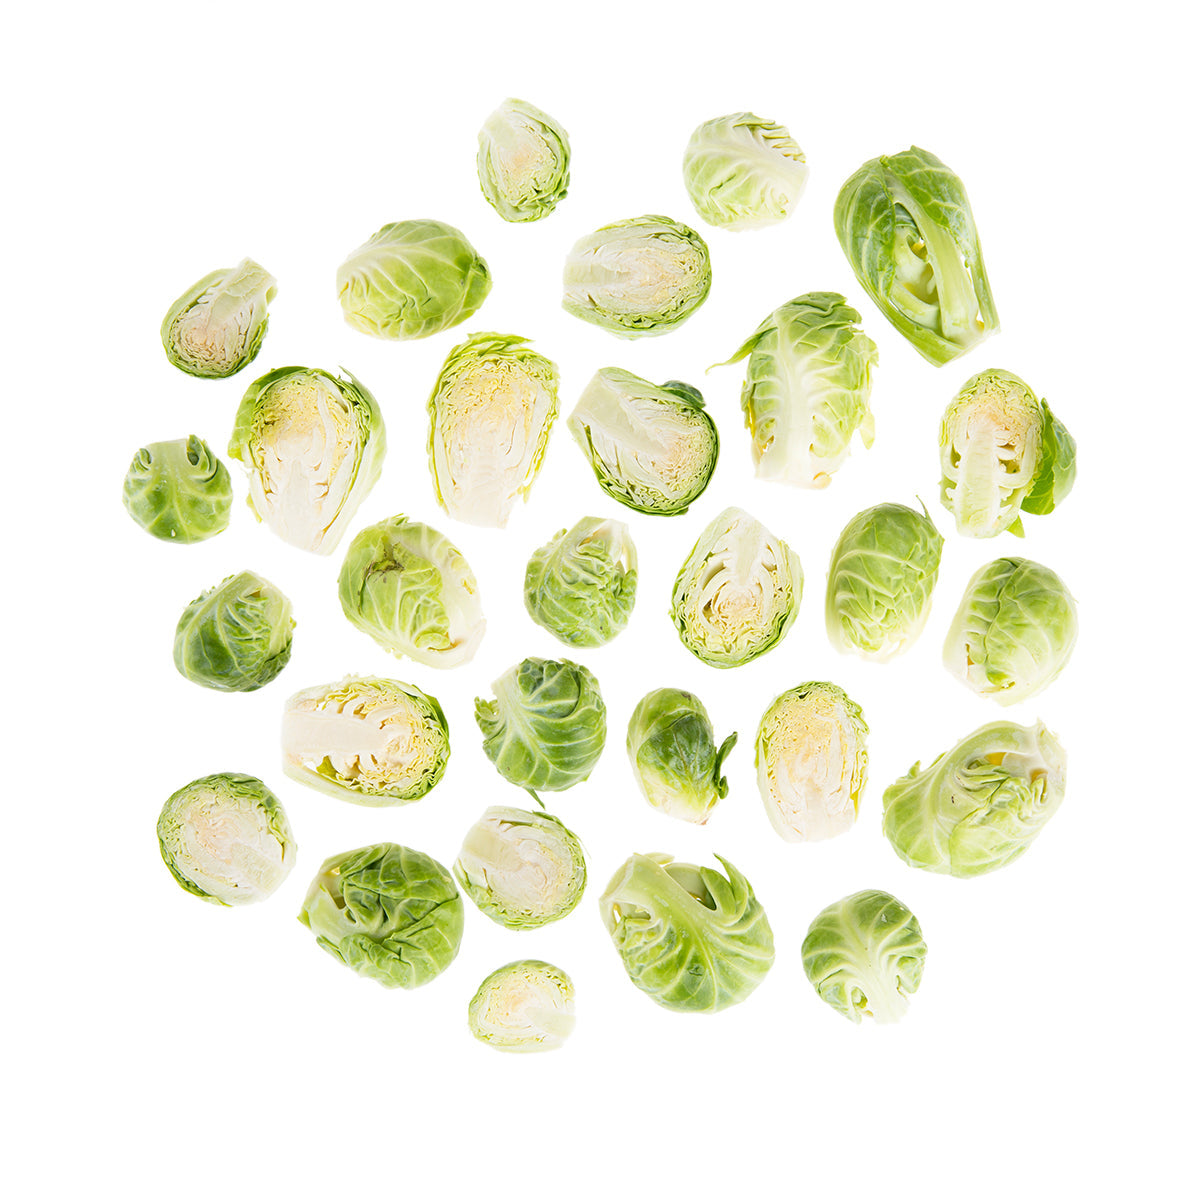 BoxNCase Halved Brussels Sprouts 5 lb